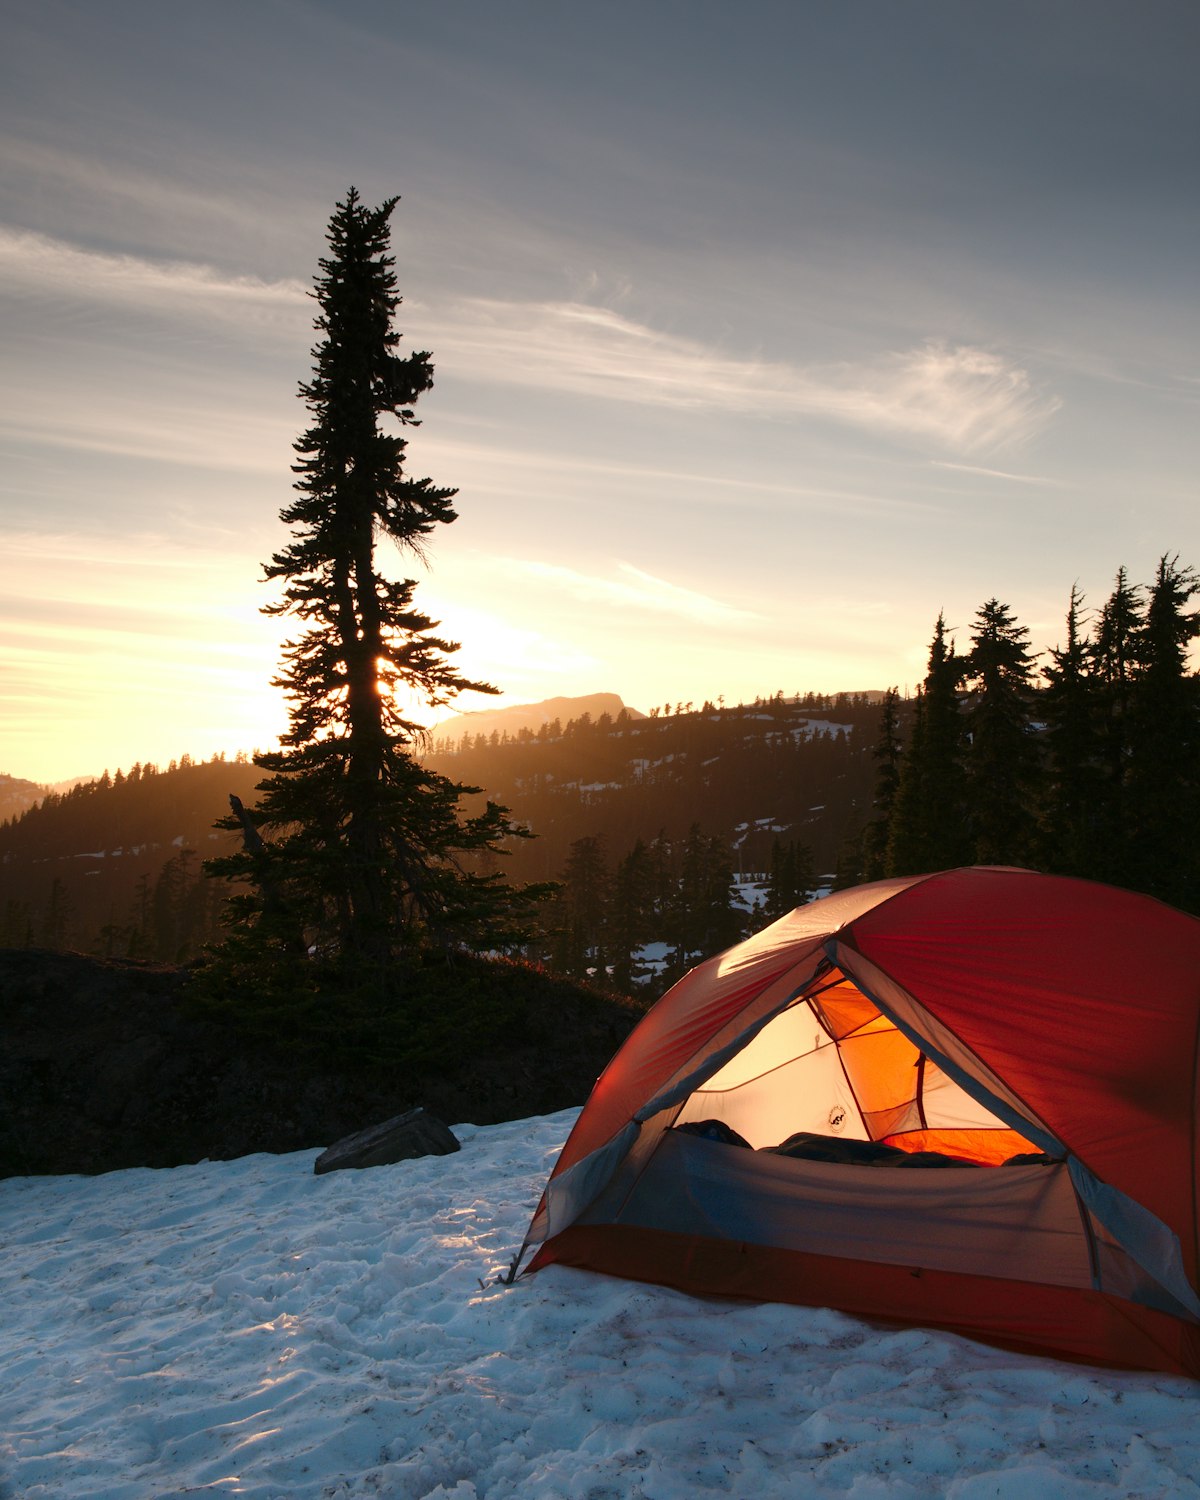 How to Stay Warm in a Tent During Winter